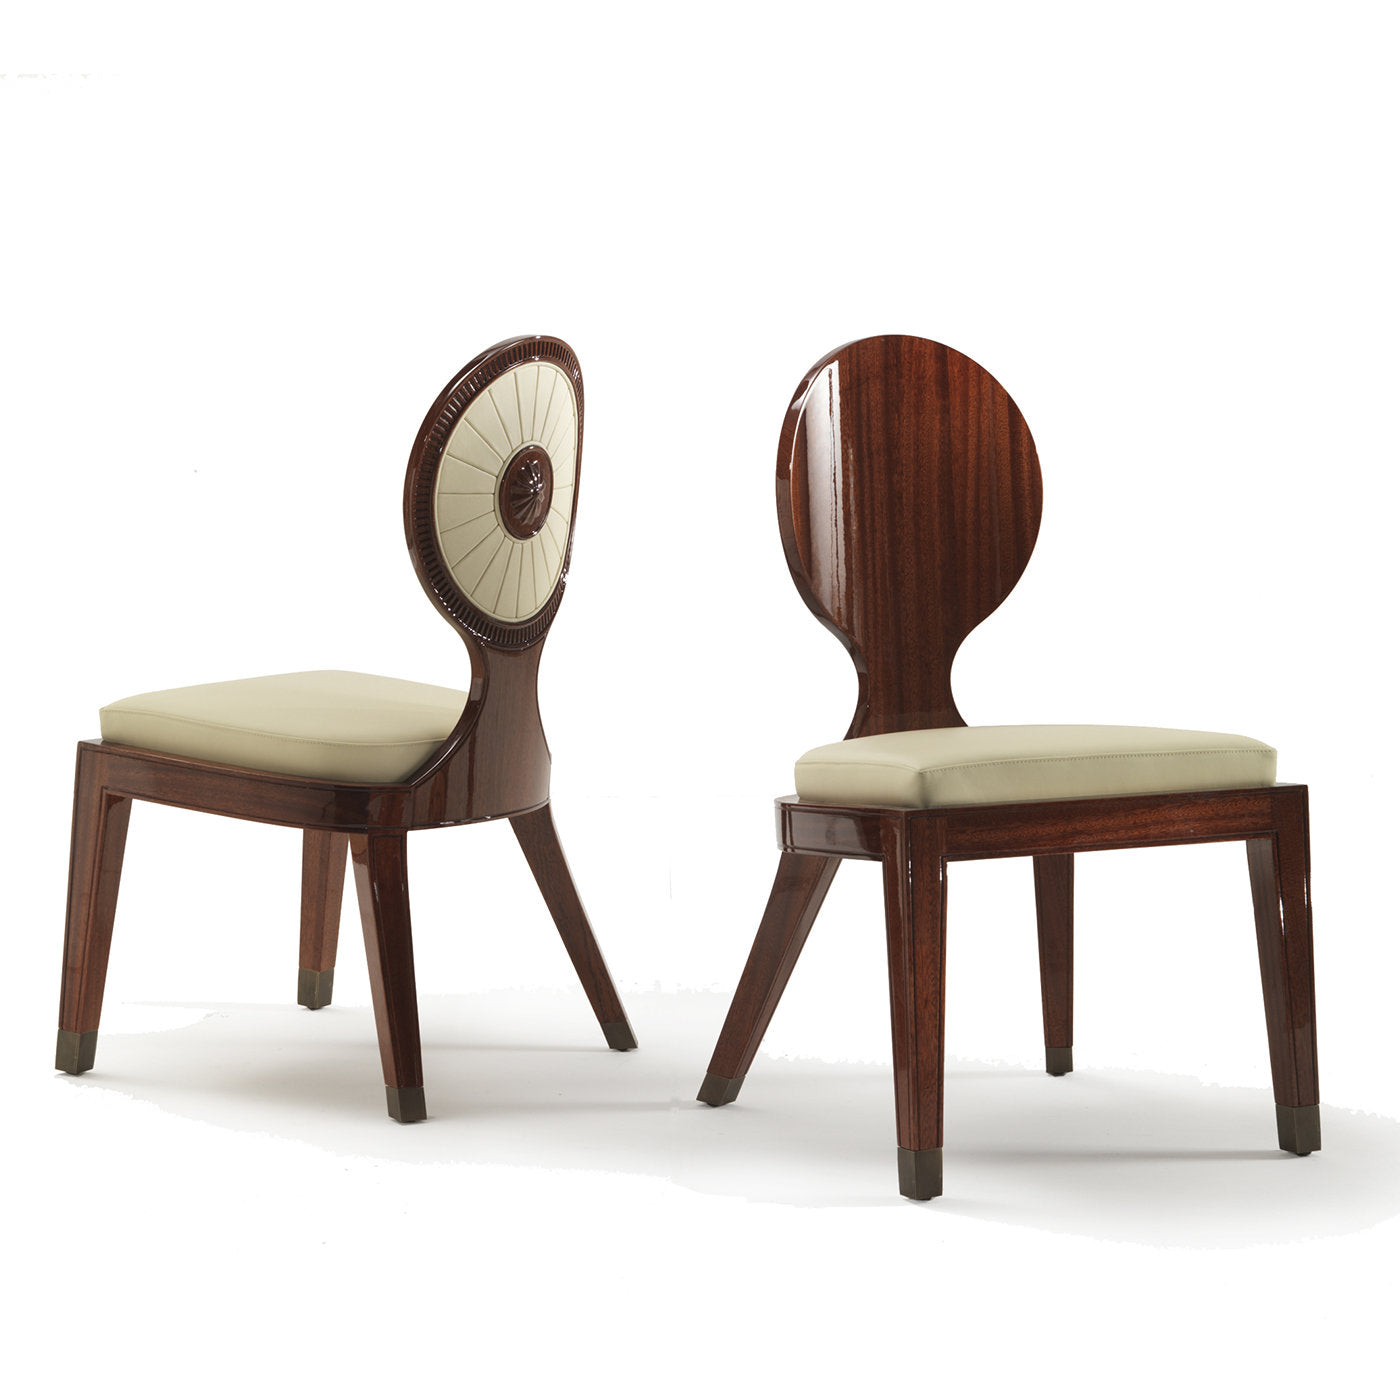 Red Sun Dining Chair by Archer Humphryes Architects - Alternative view 1